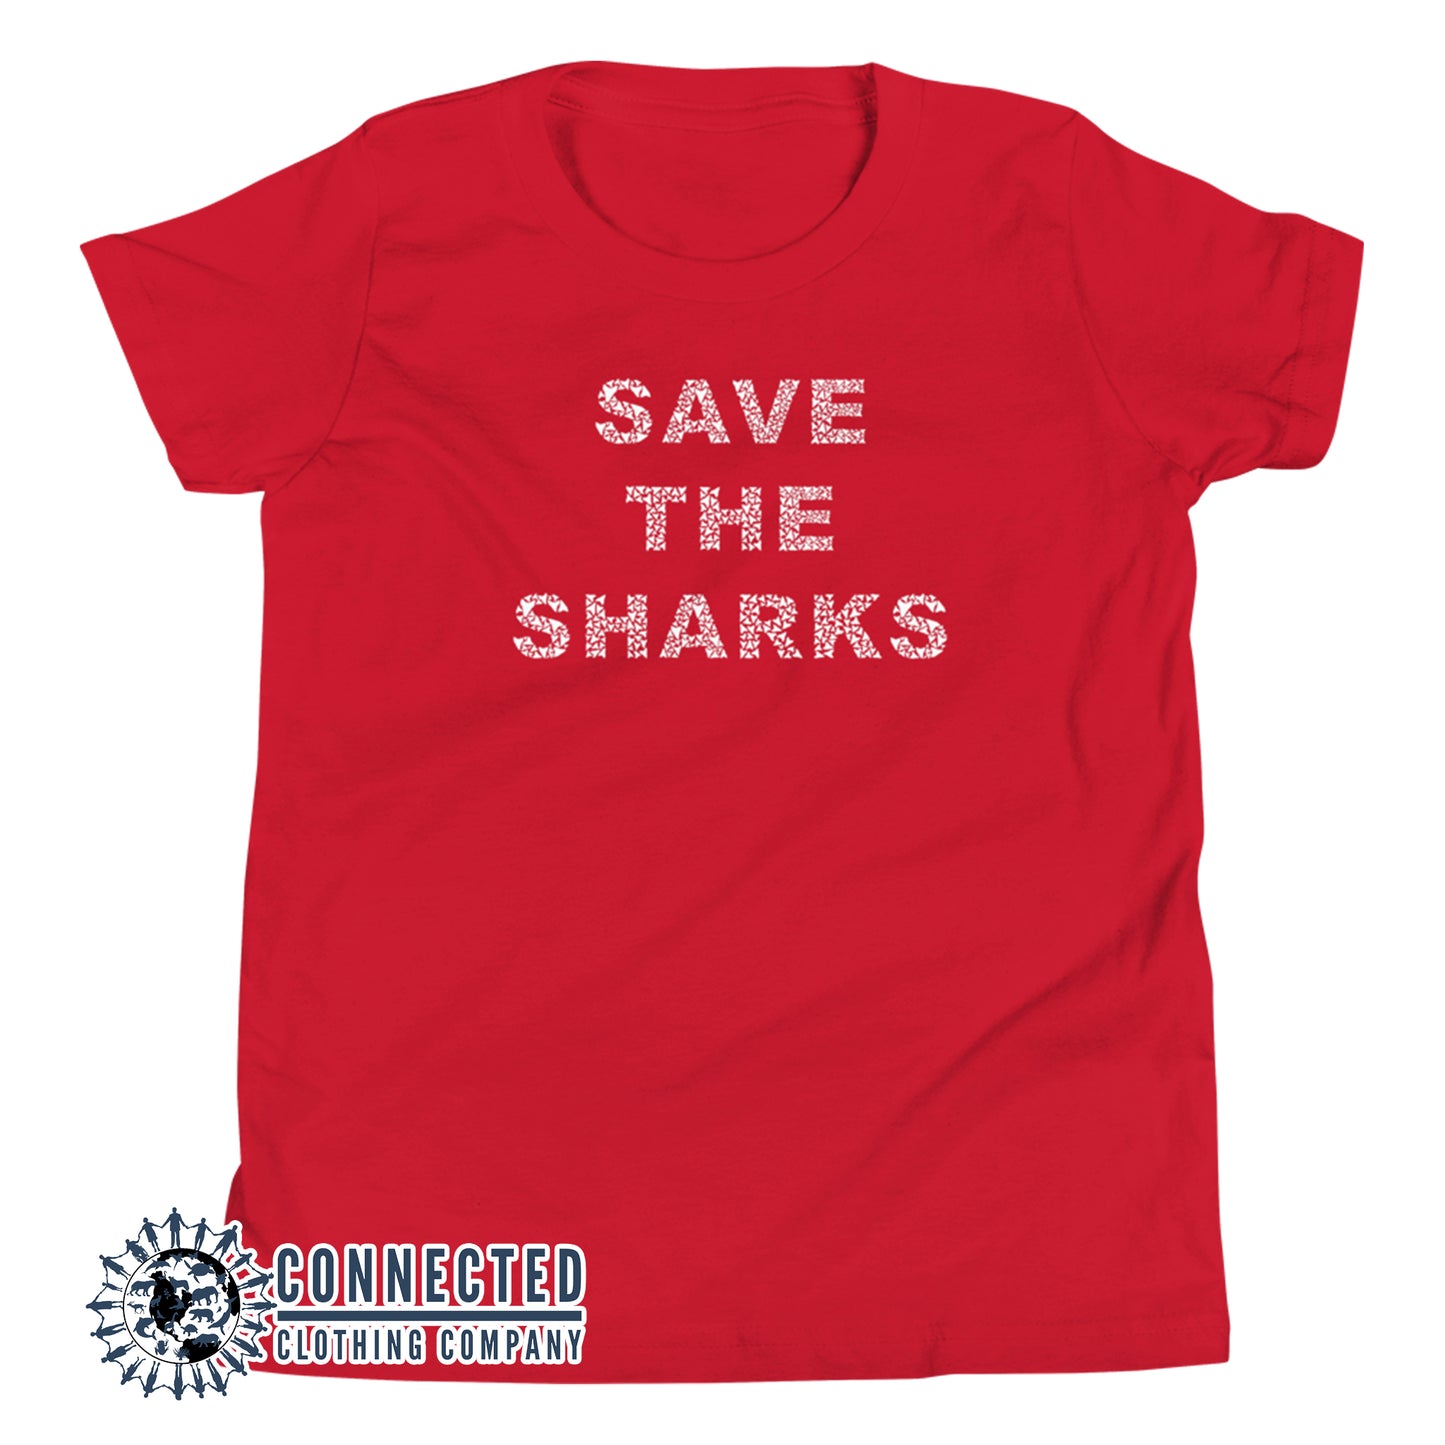 Red Save The Sharks Youth Short-Sleeve Tee - Connected Clothing Company - 10% of profits donated to Oceana shark conservation